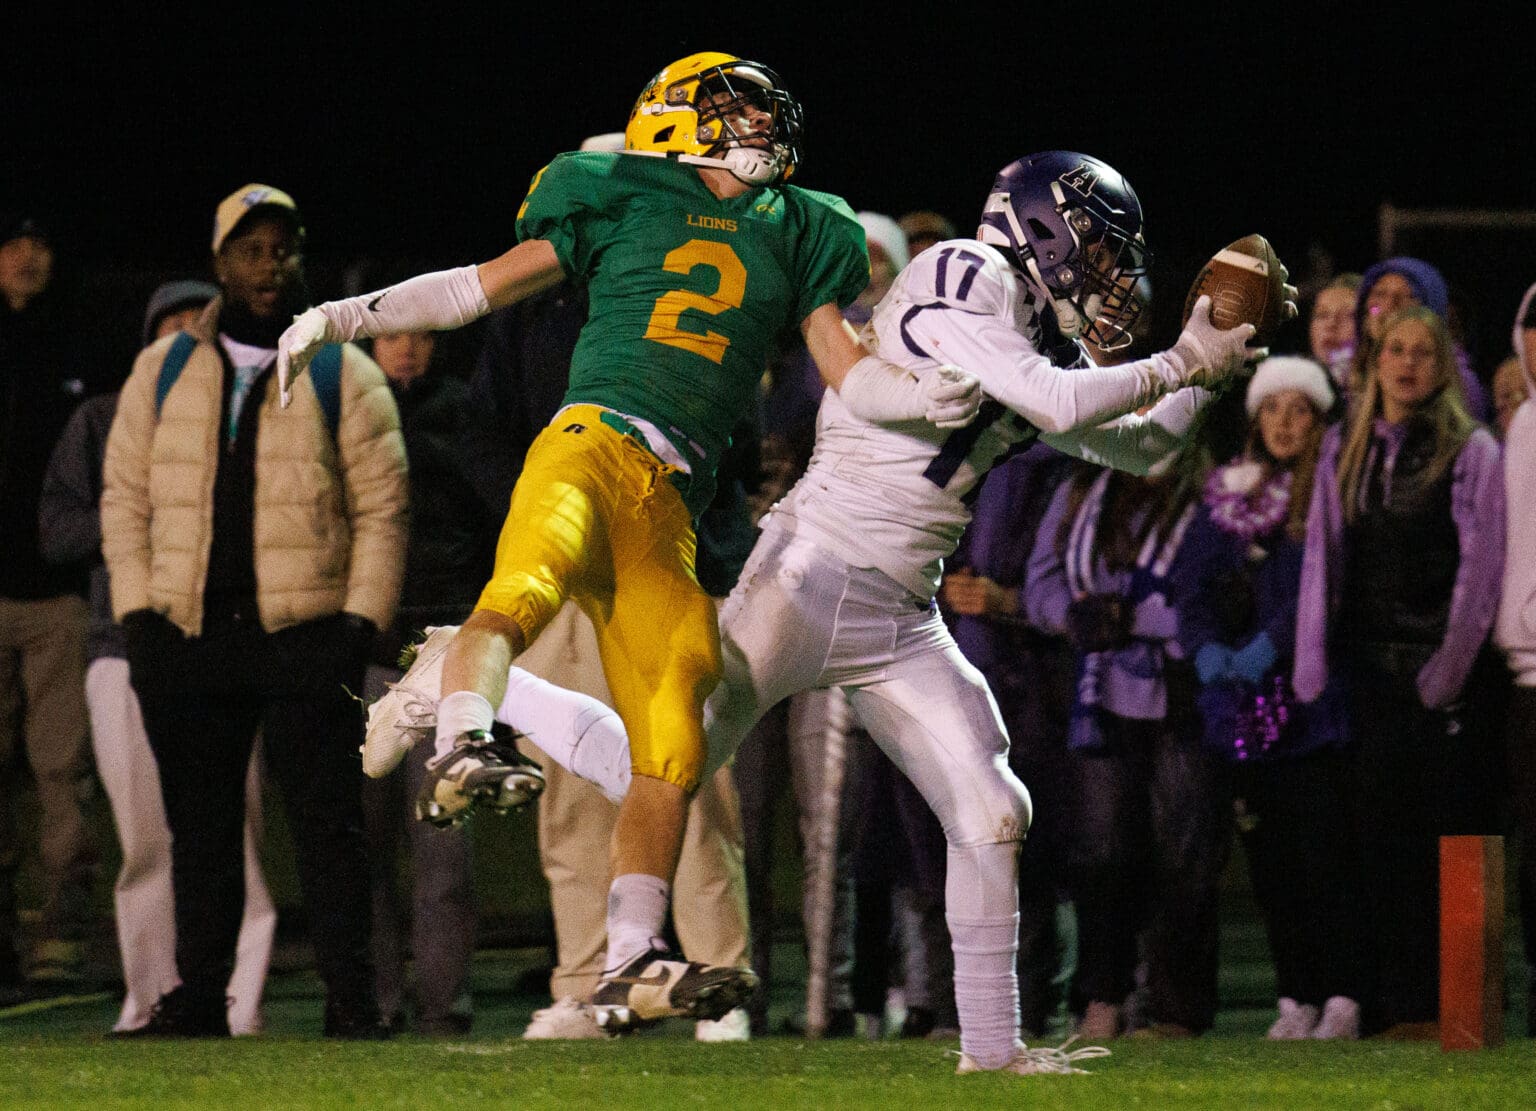 Anacortes' Luca Moore intercepts a pass intended for Lynden's Brady Elsner with 1:36 left in the game Friday